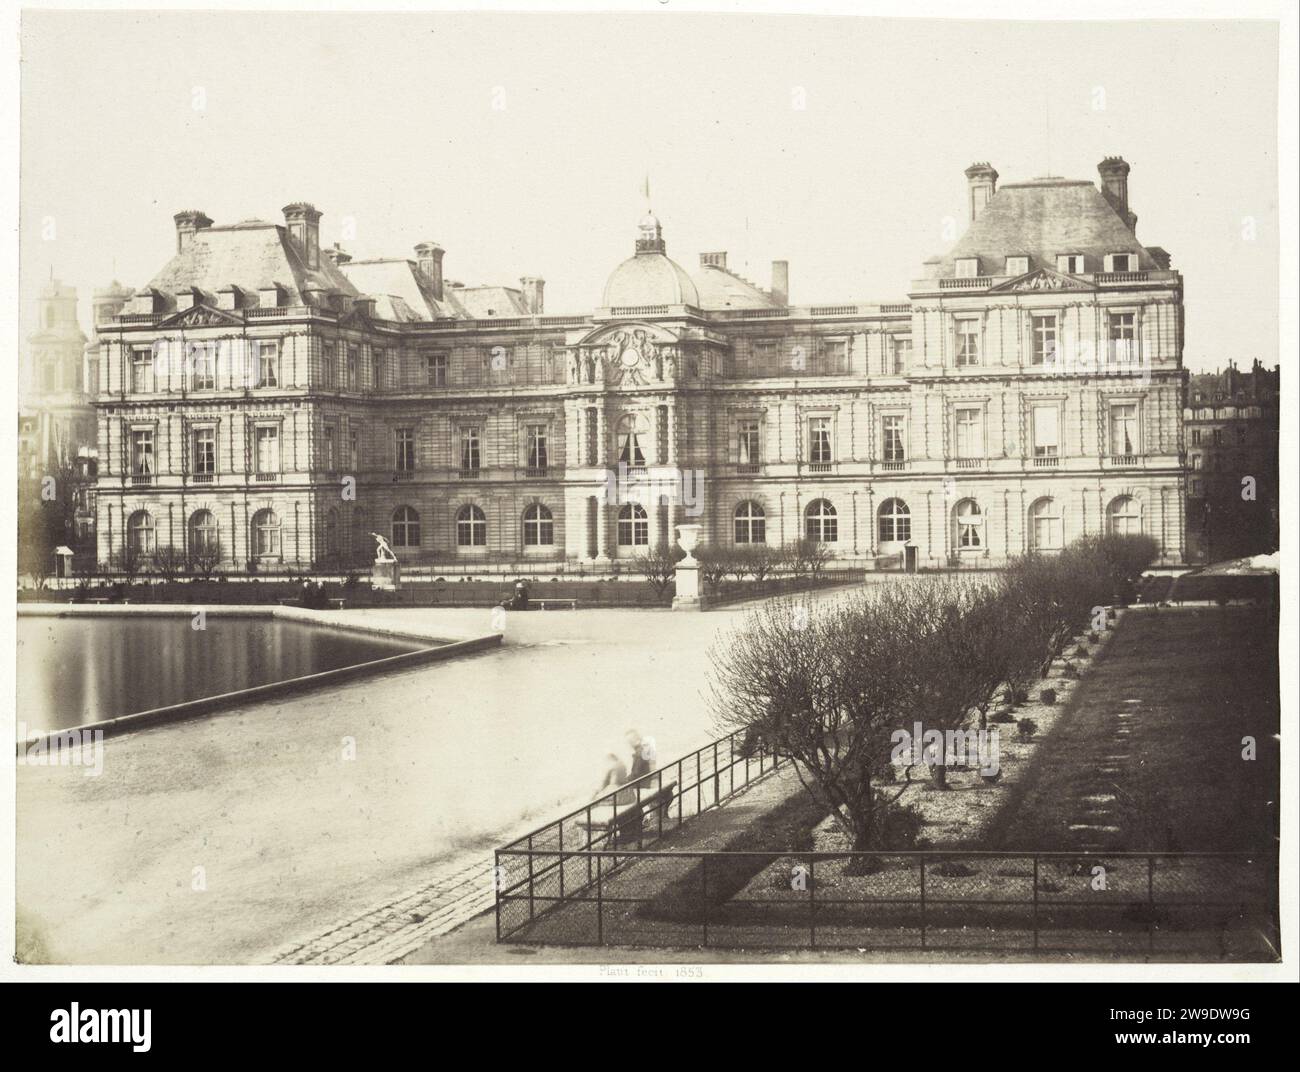 Palea you Luxembourg, Parijs, Charles-Plaster, 1851 photograph  Paris paper. cardboard salted paper print palace Luxembourg Palace Stock Photo